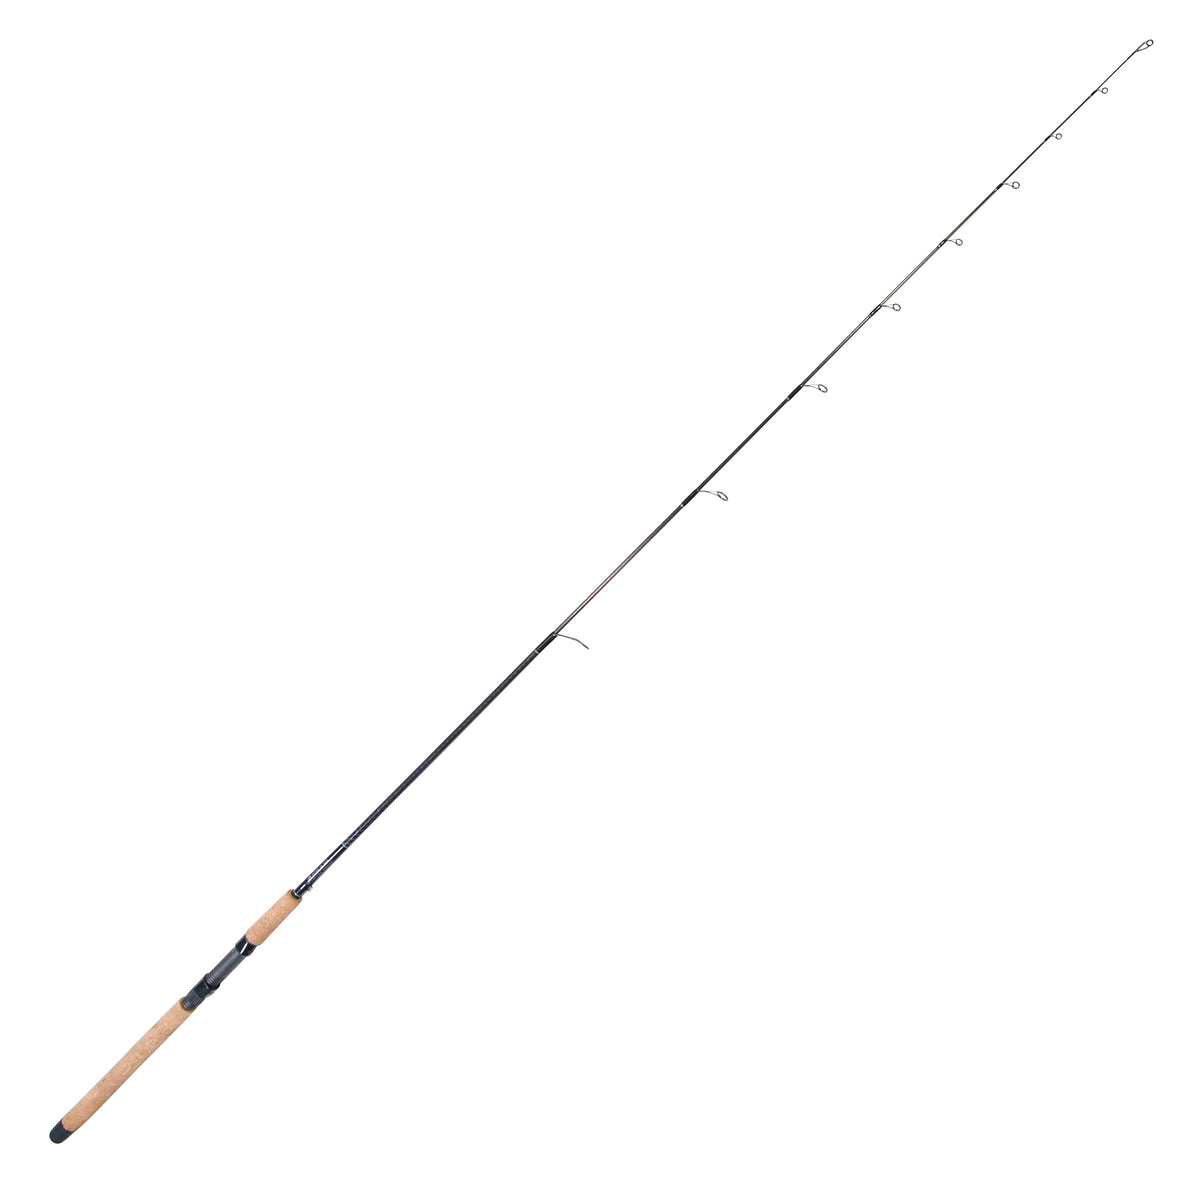 BlacktipH Live Bait Fishing Rod with Winthrop Epic Butt and Carbon Fiber  Wrap